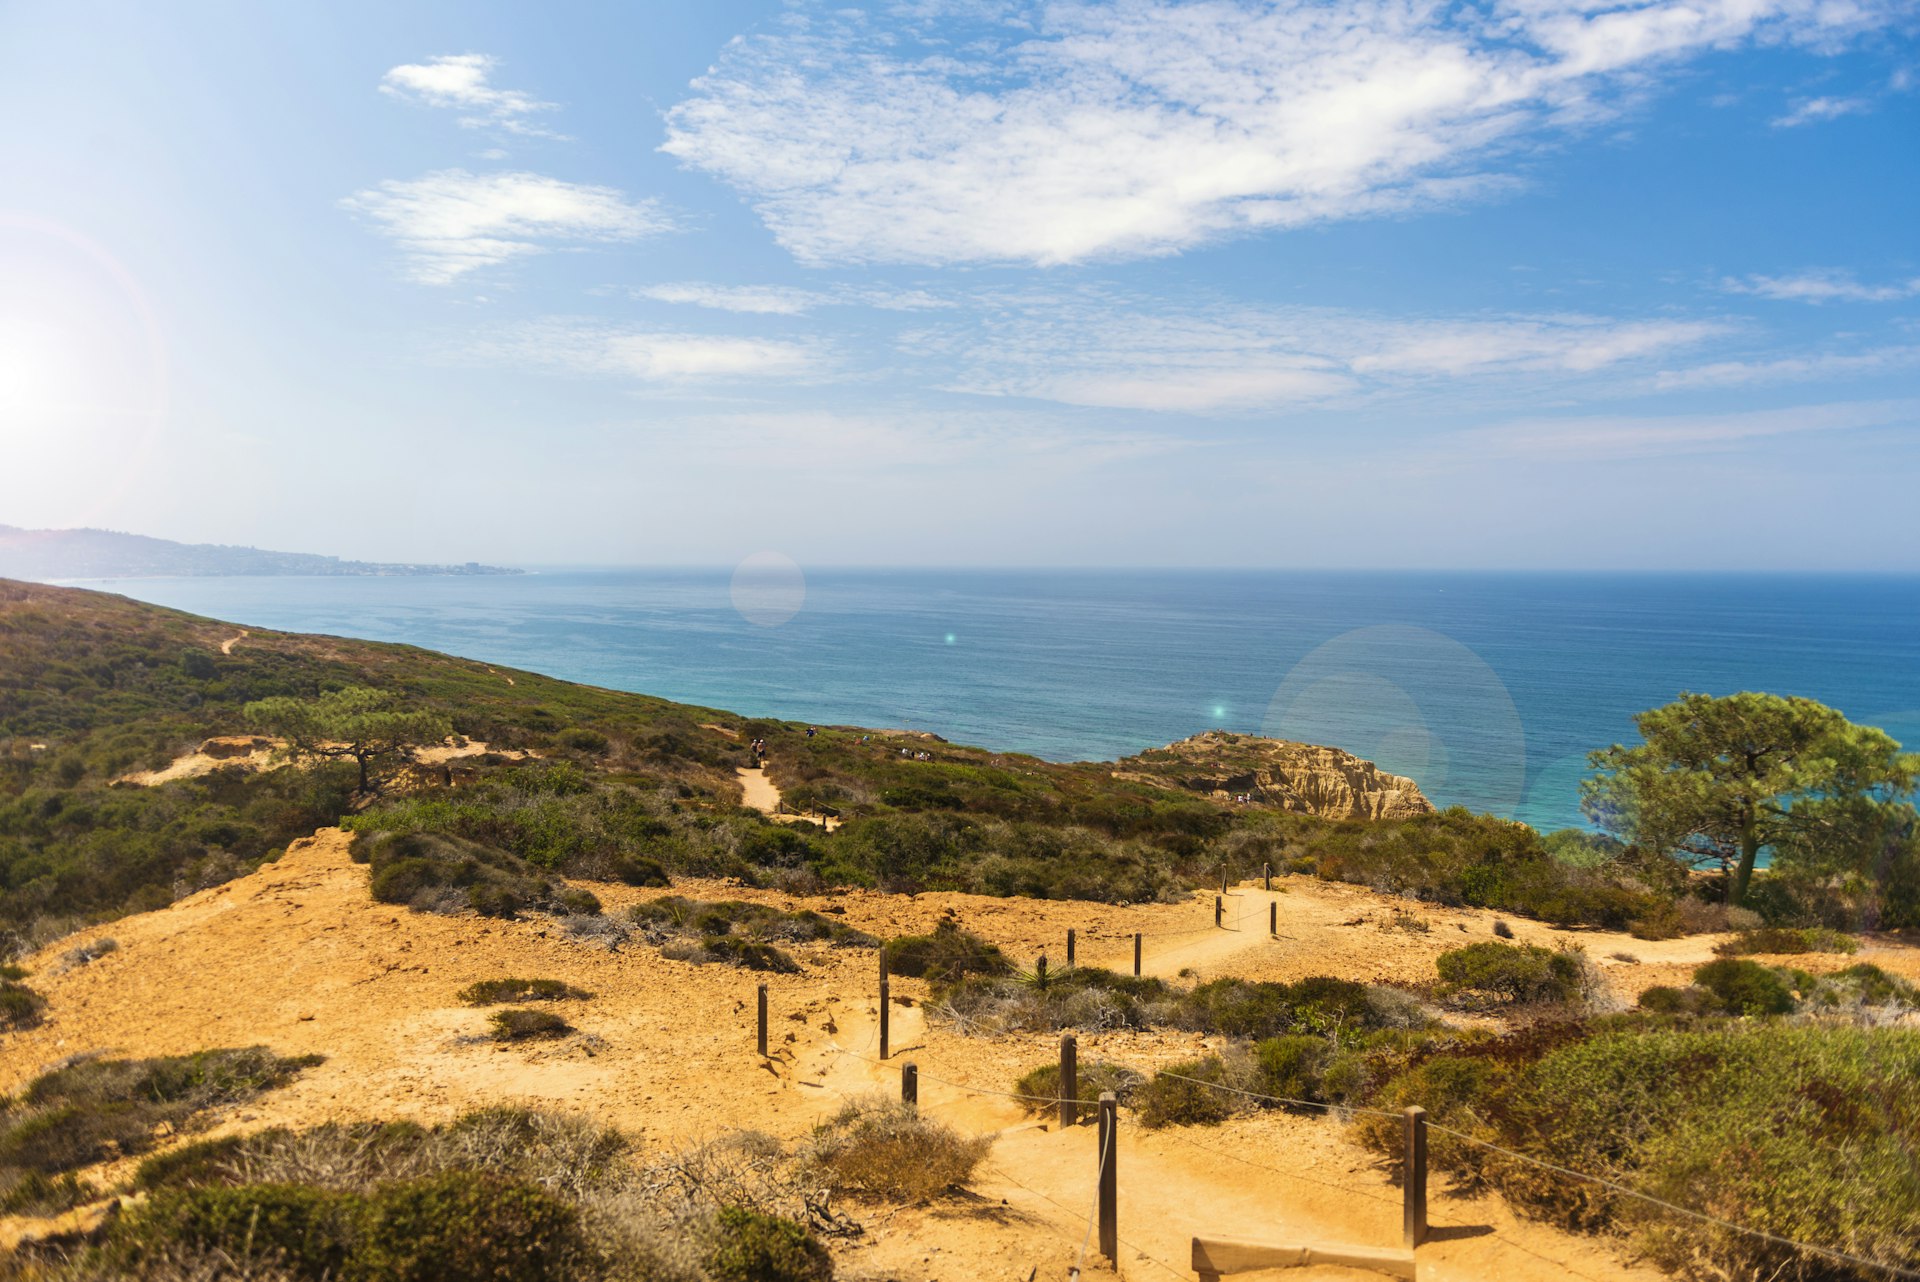 A view across the greenery of Torrey Pines State Reserve in ,San Diego with the golden sands of Blacks Beach below